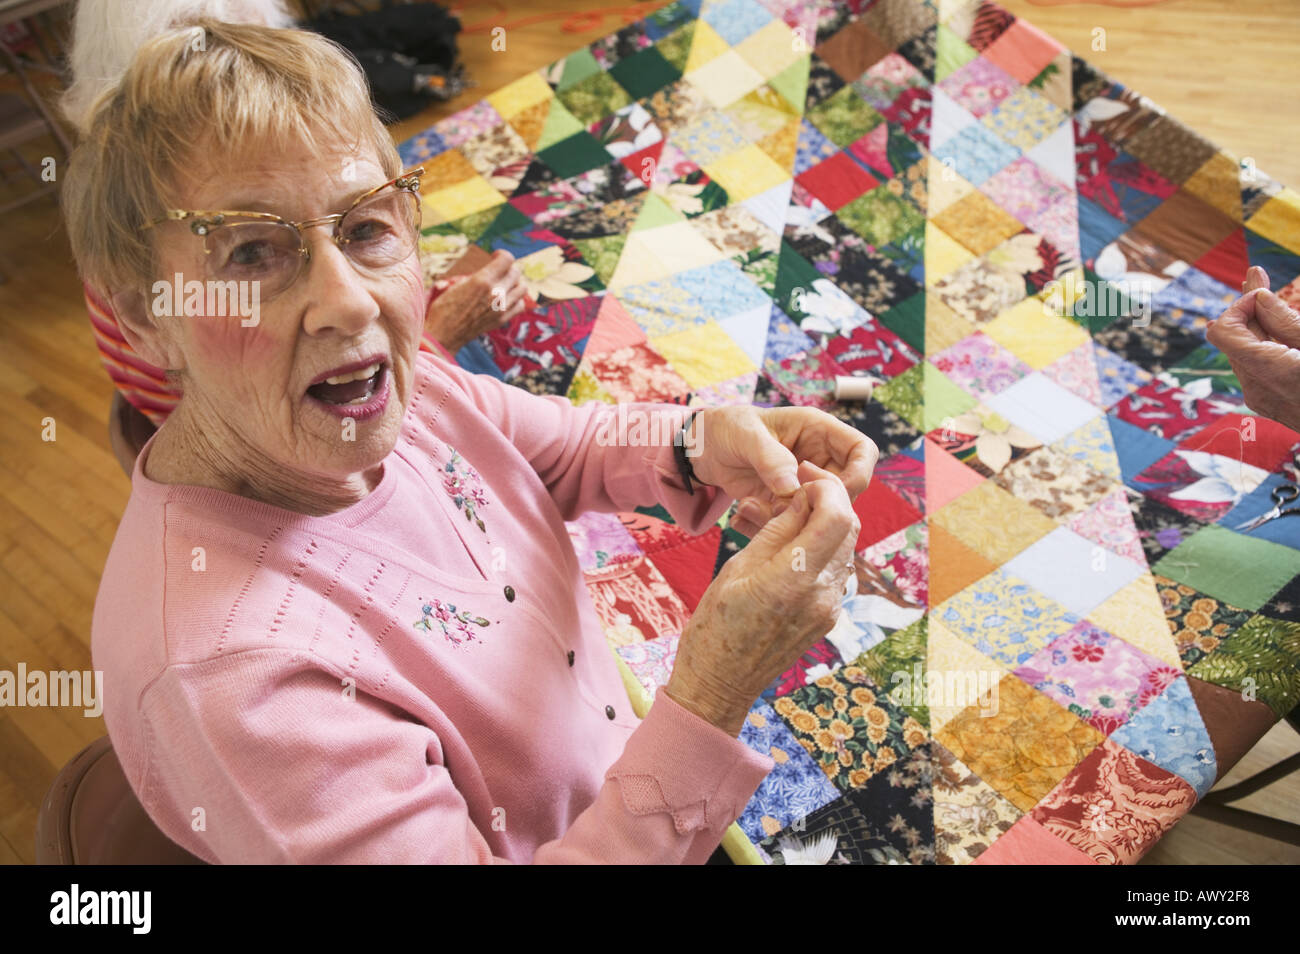 Portrait of a woman quilting Stock Photo